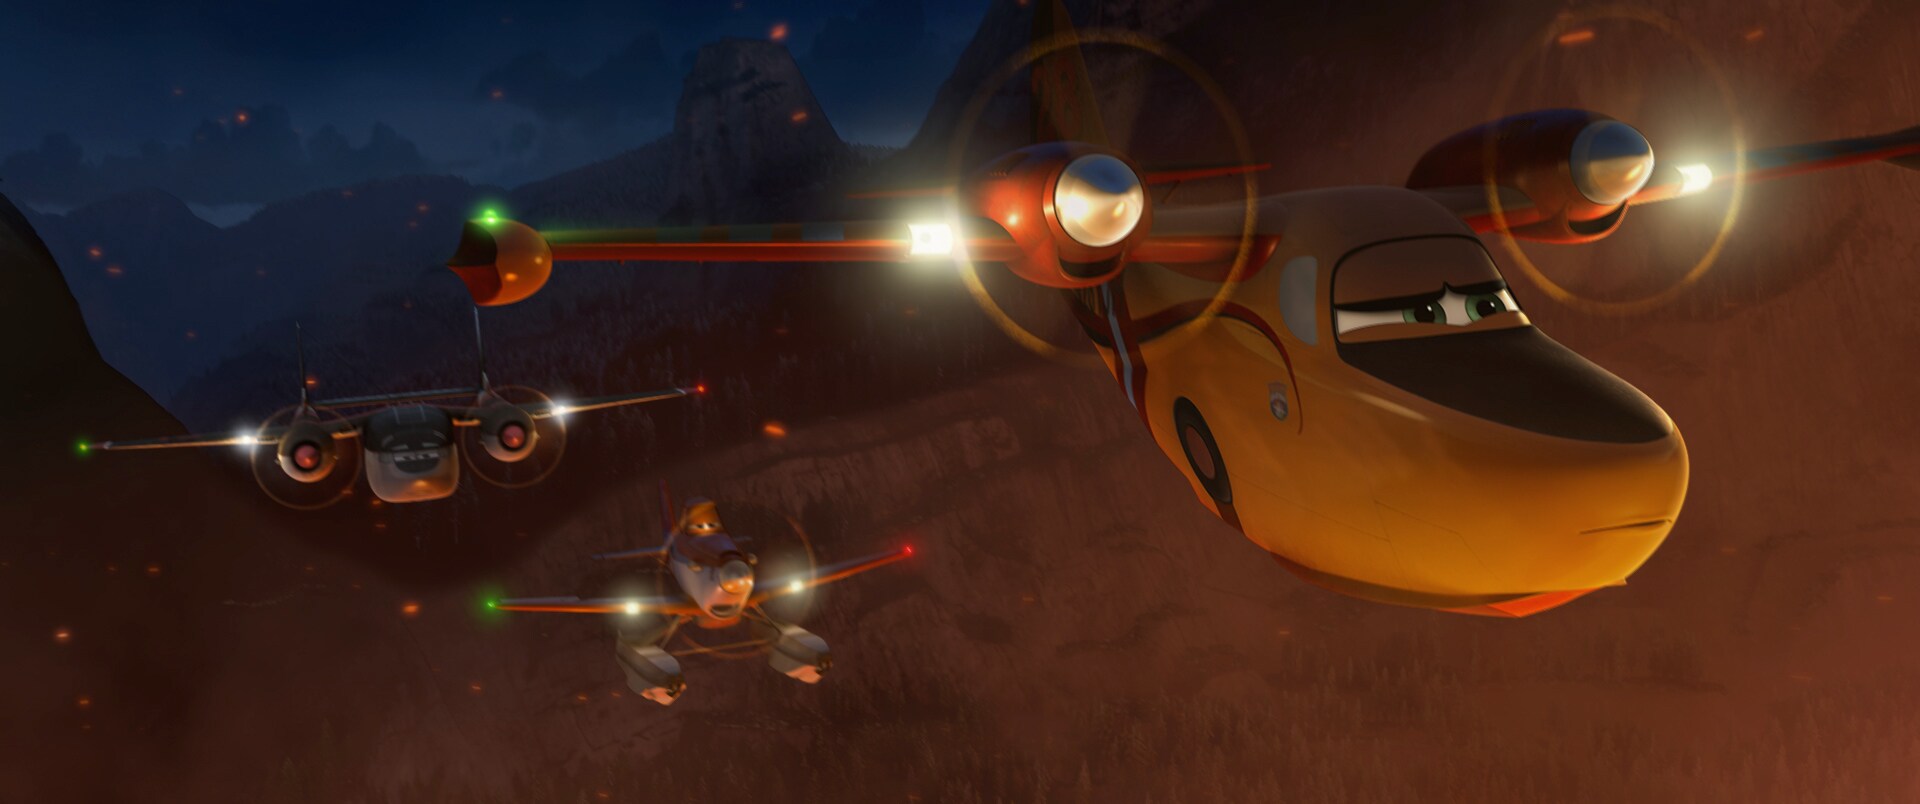 Dusty Crophopper ( Dane Cook)and friends on a night mission in the movie "Planes: Fire & Rescue"